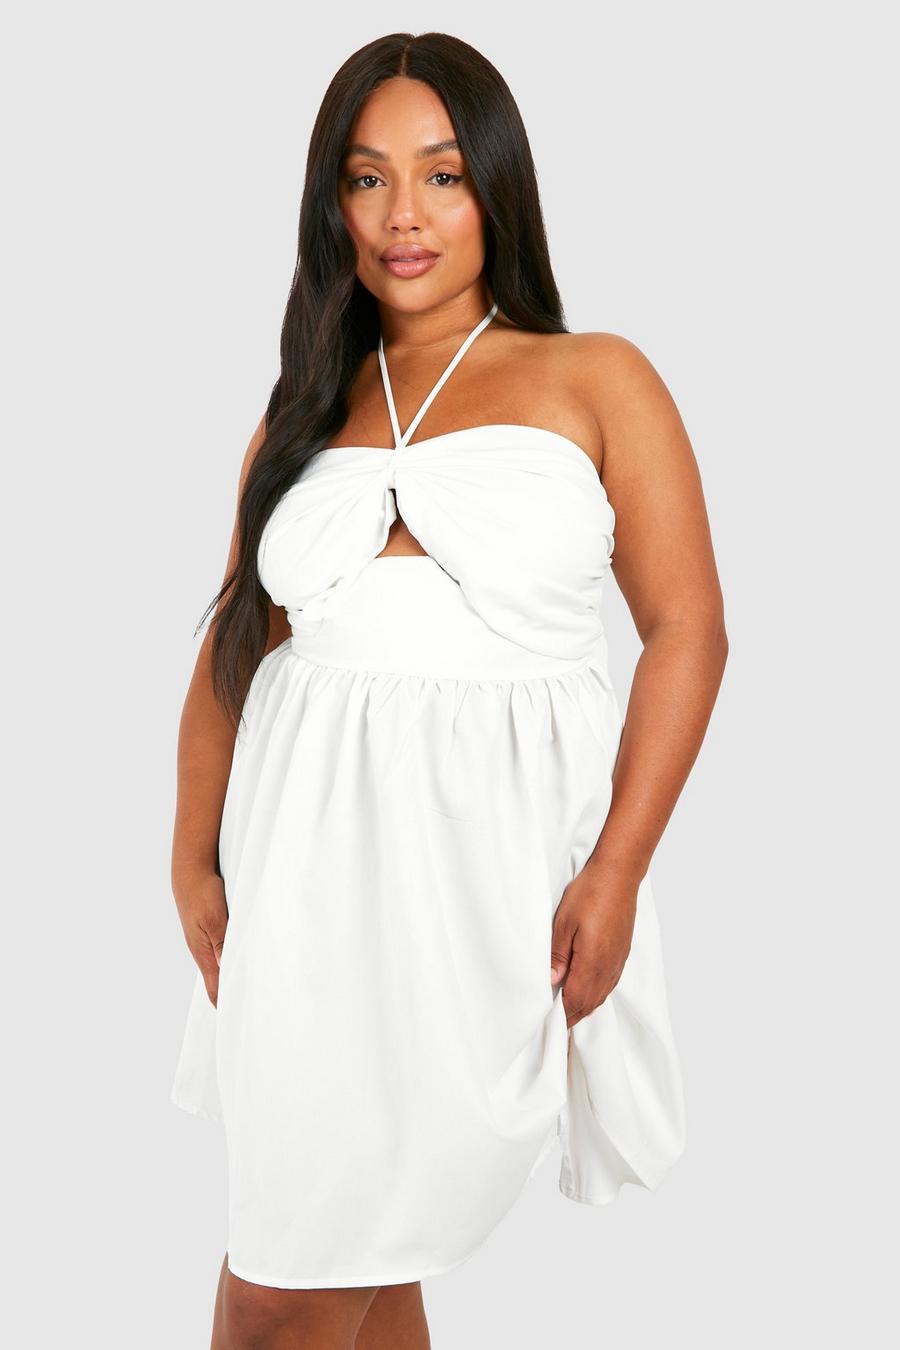 Grande taille - Robe patineuse nouée, White